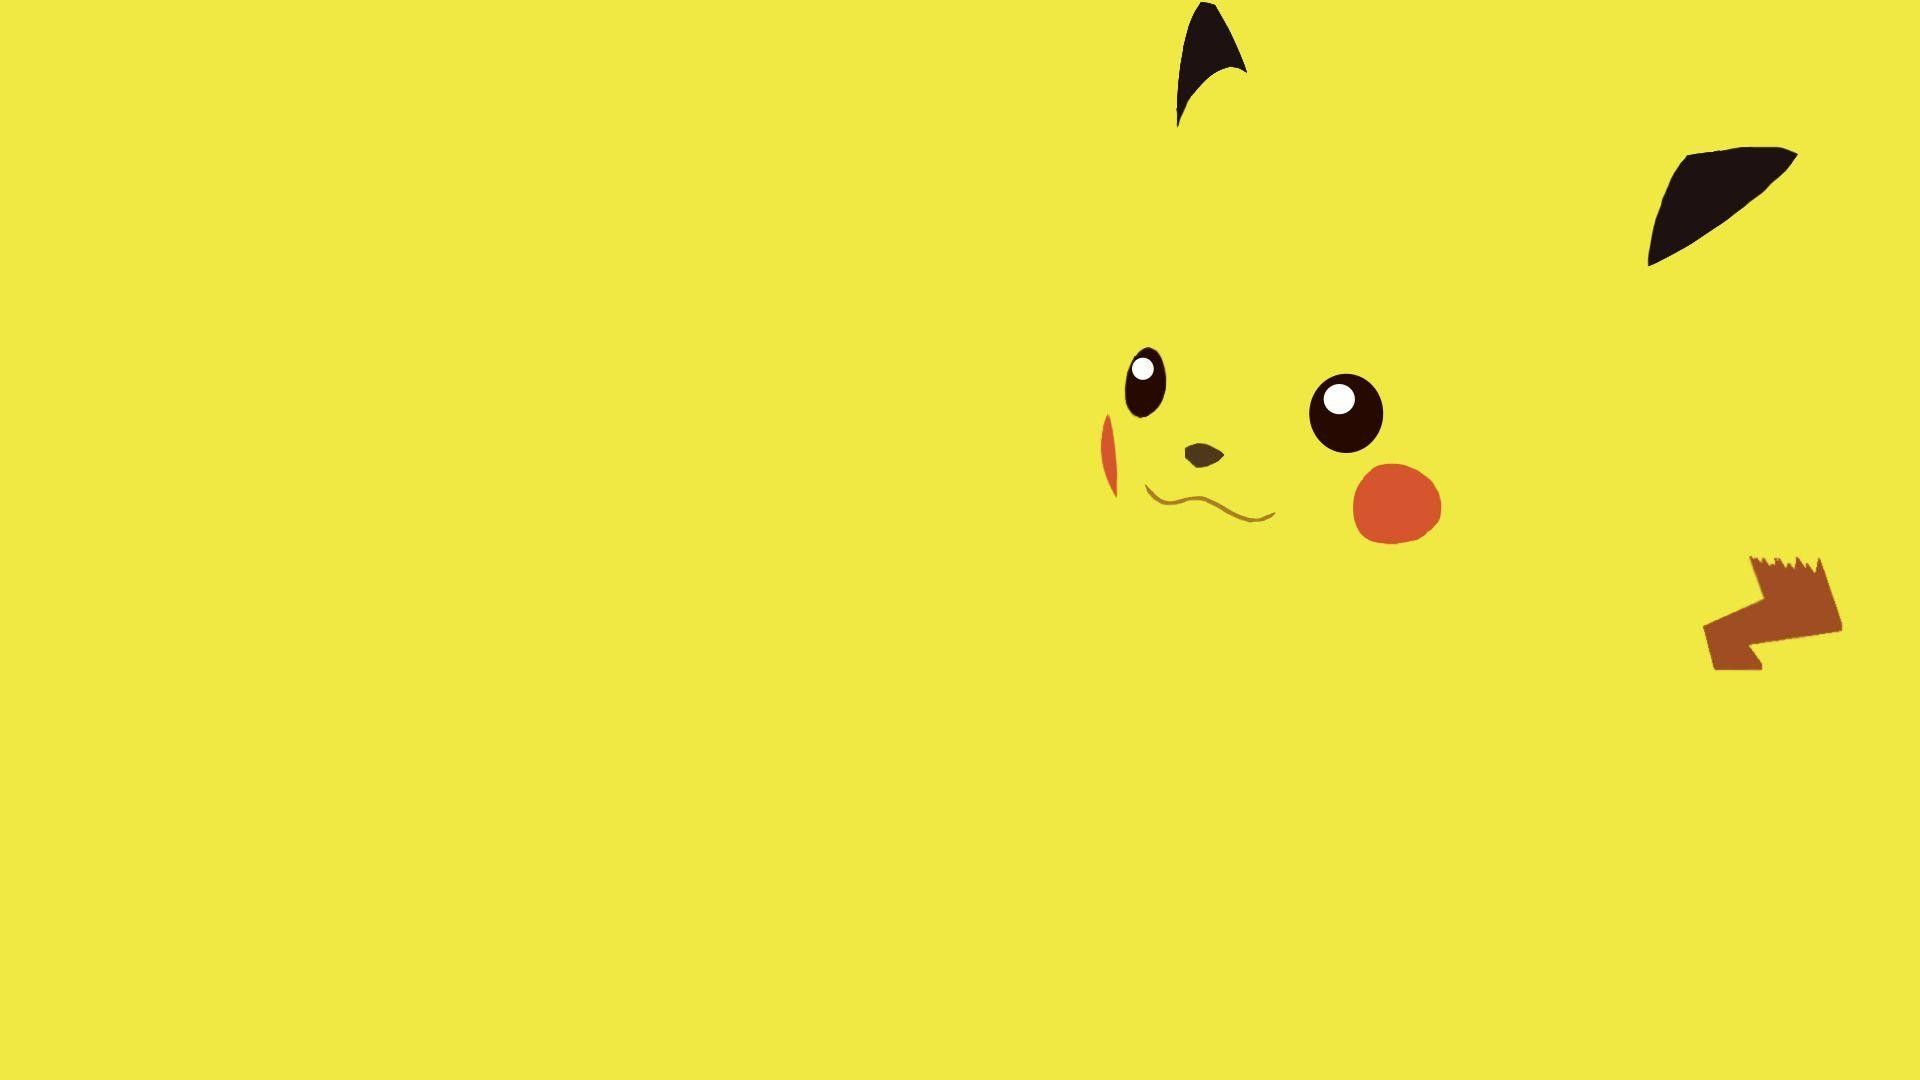 A yellow background with a picture of Pikachu from Pokemon - Pikachu